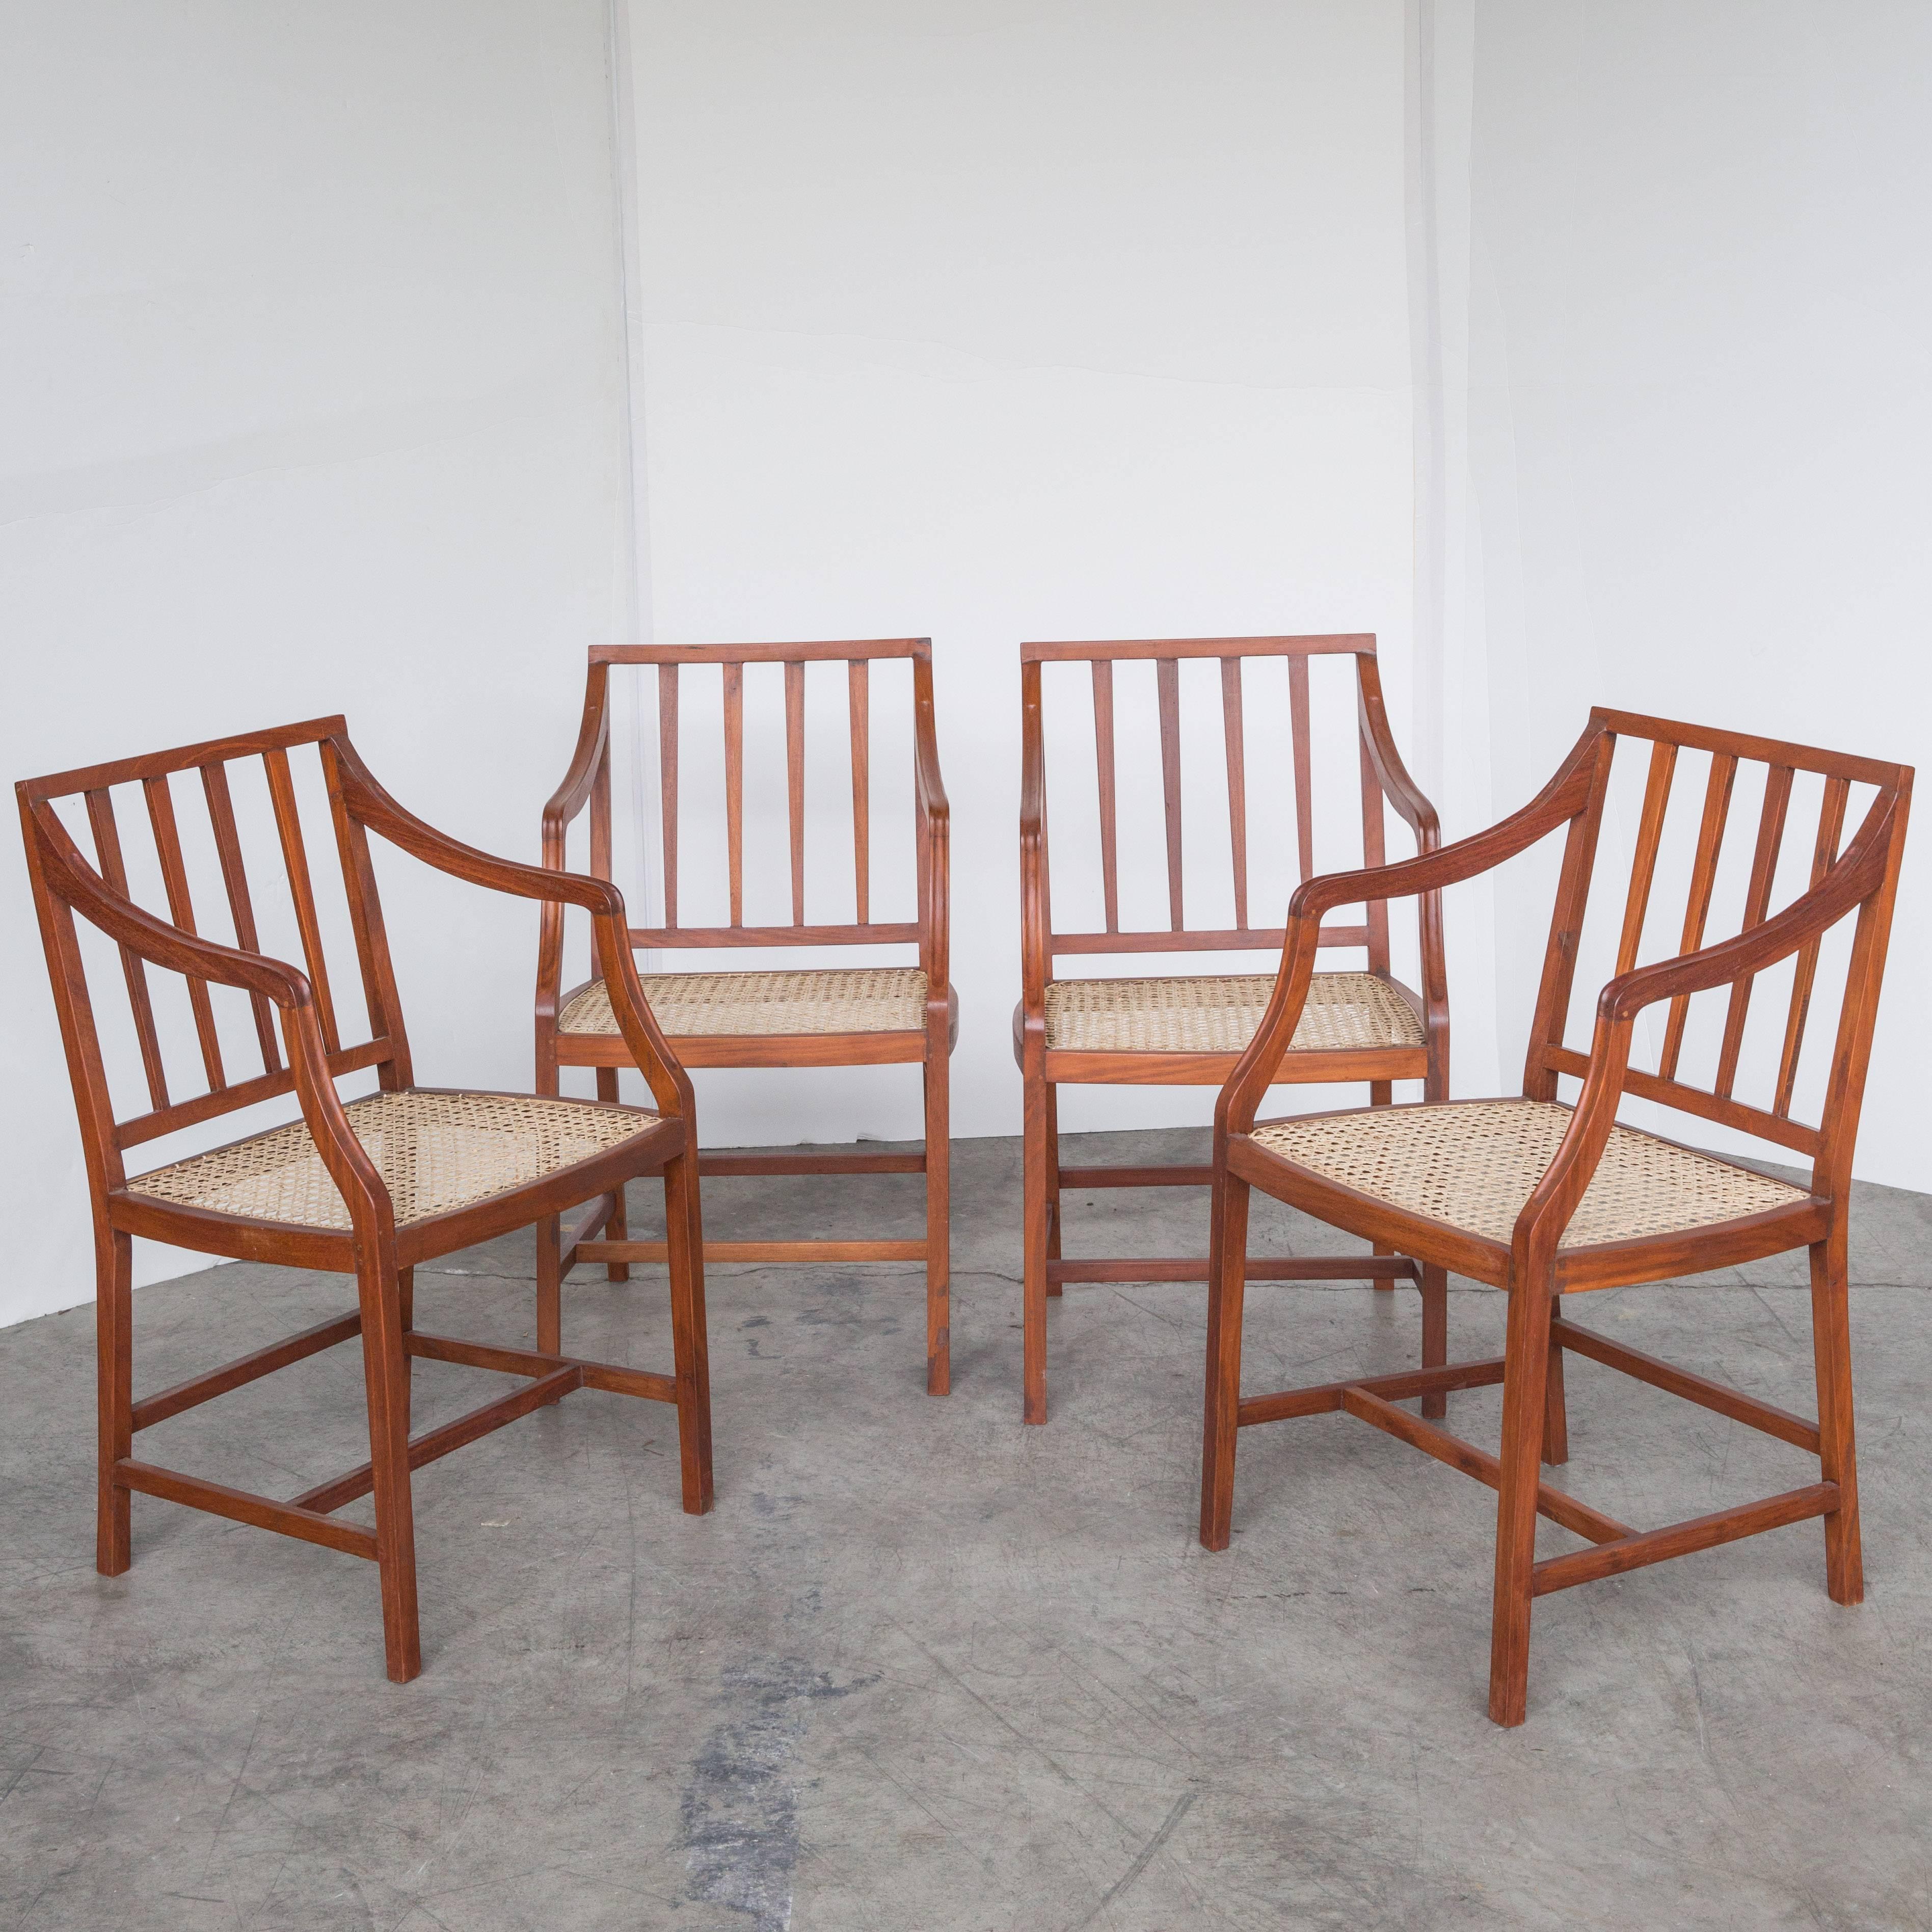 Simple and elegant caned chairs made from rare nadun wood.